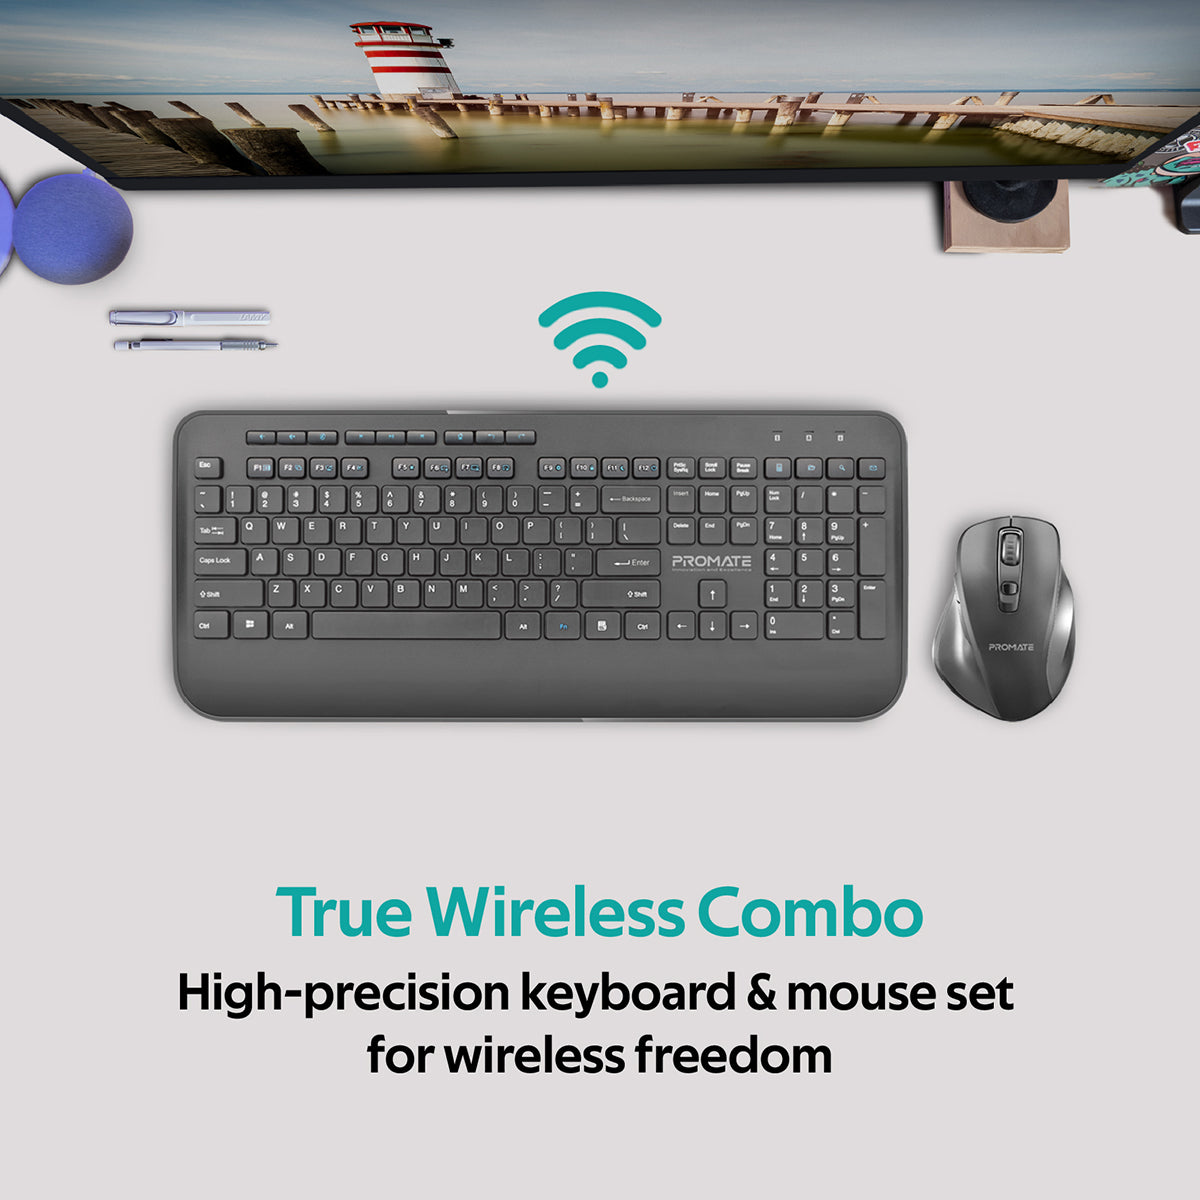 Promate Wireless Keyboard and Mouse Combo, Ergonomic Sleek 2.4Ghz Full-Size Wireless Keyboard with Palm Rest and 1600 DPI Mouse, Nano USB Receiver and Auto-Sleep Function for PC, Desktops, Windows, IOS, ProCombo-8 English